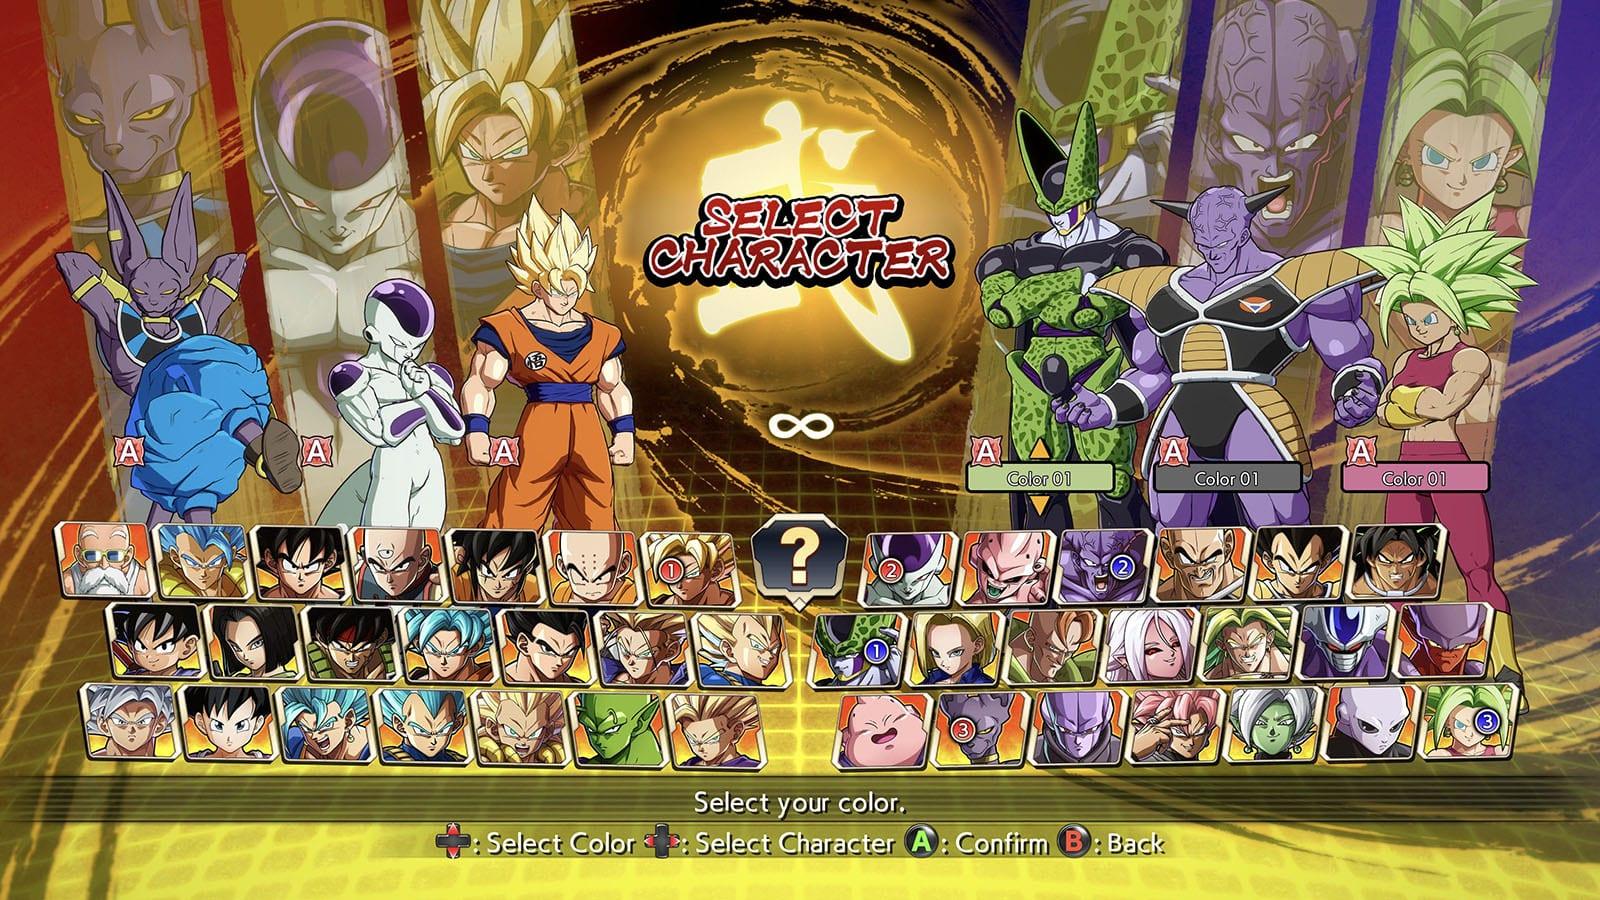 Dragon Ball FighterZ Cheats and Unlockables for Xbox One - Cheat